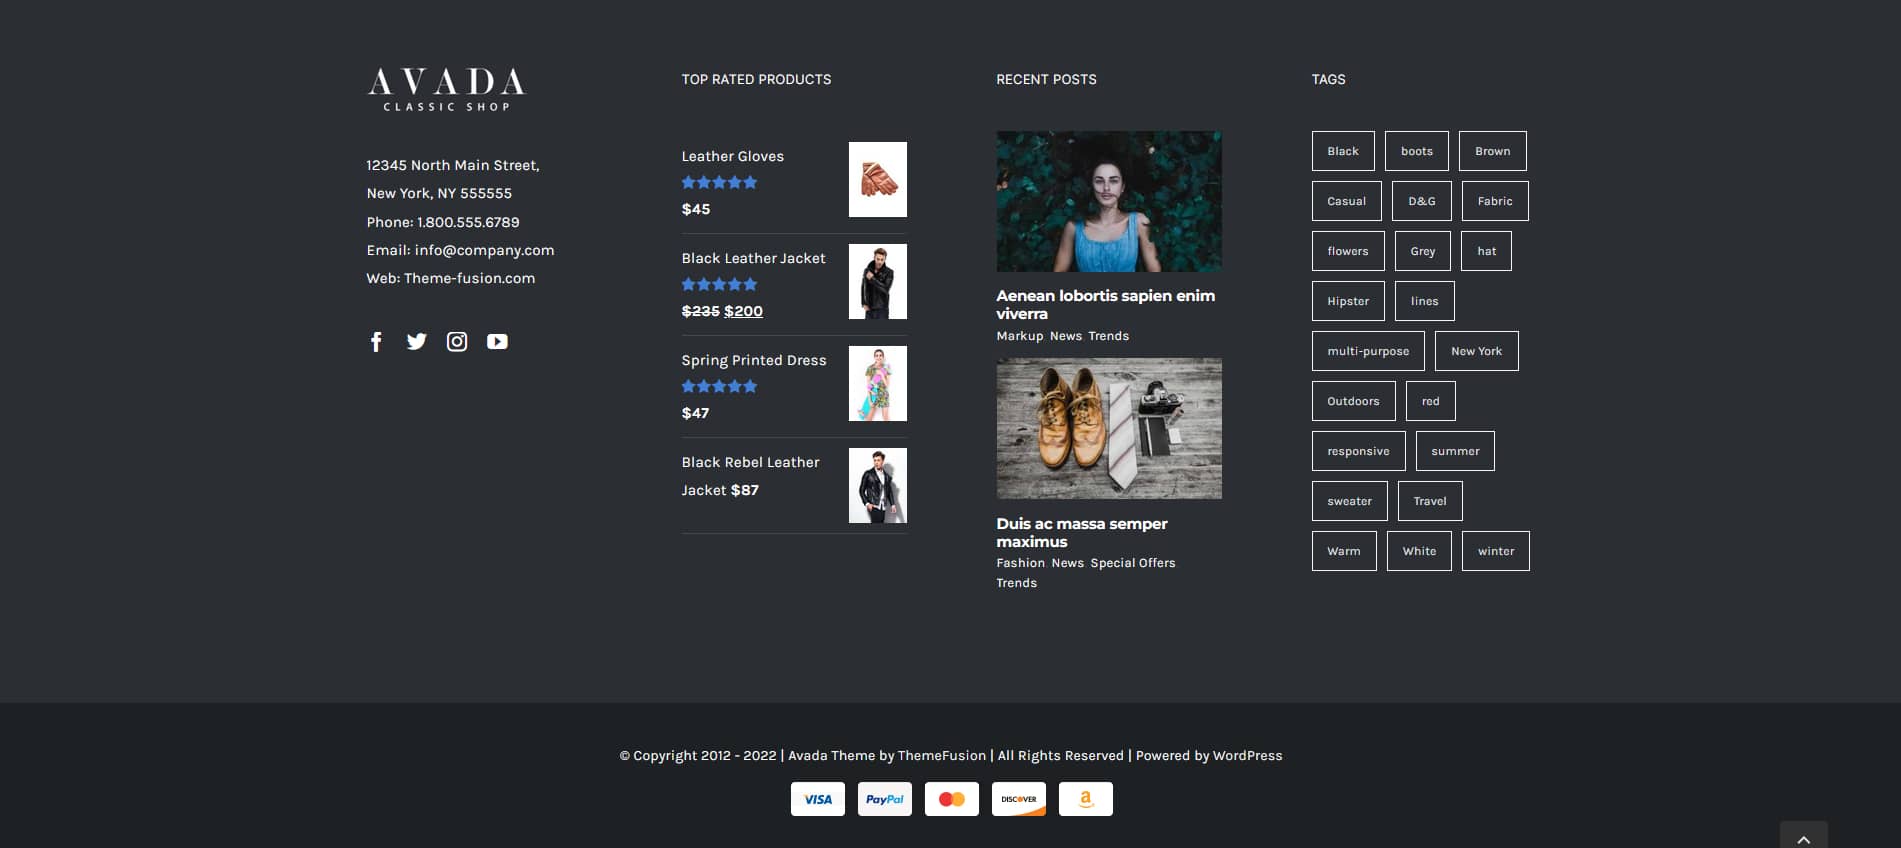 Avada Classic Shop Footer